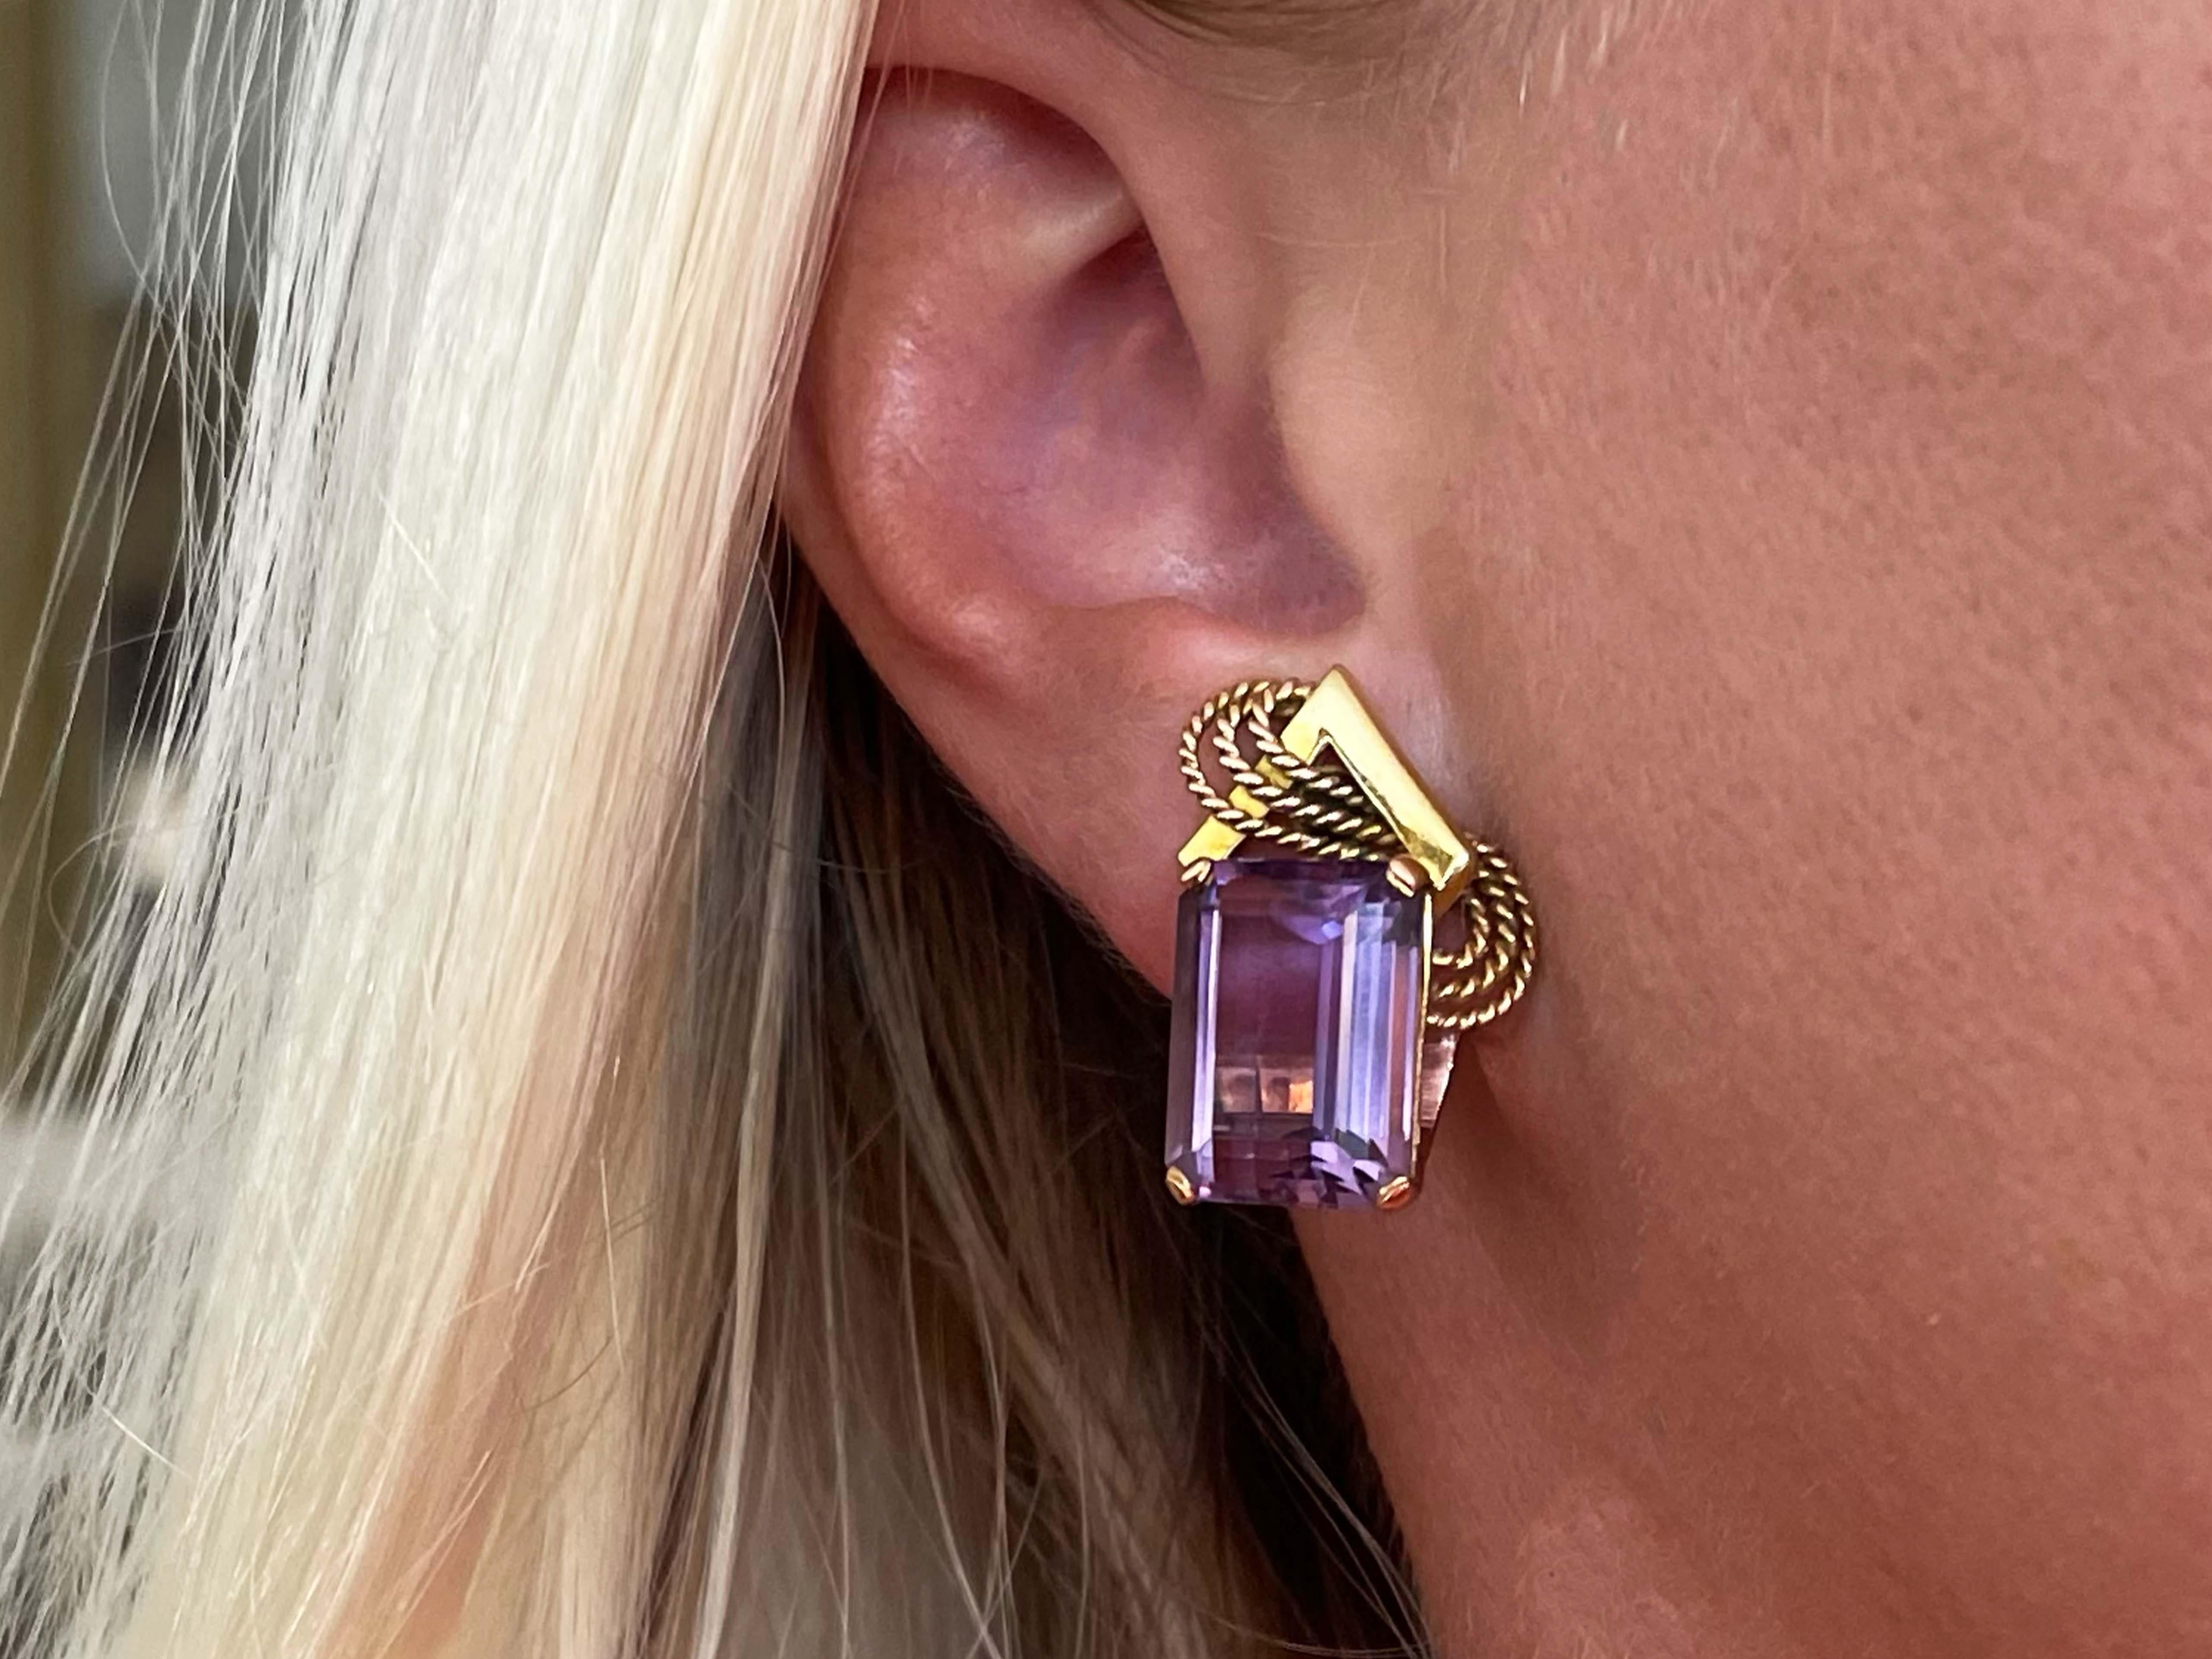 Specifications:

Metal: 18k Yellow Gold

Total Weight: 14.6 Grams

Amethyst Measurements: 15 mm x 11.16 mm x 7.6 mm

Stamped: 